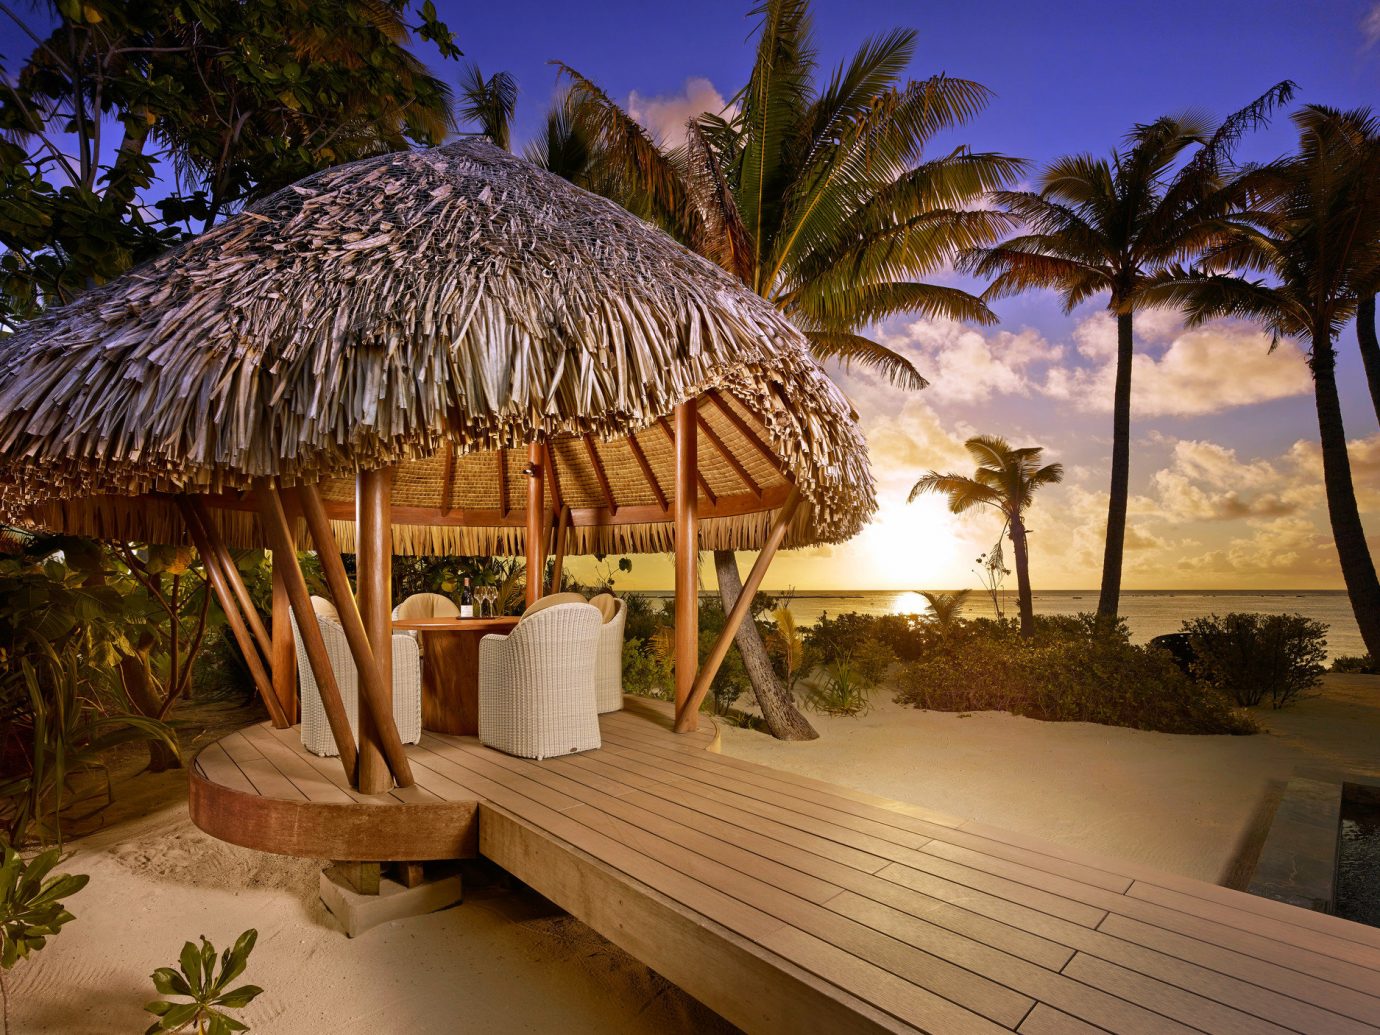 Beach Dining golden hour Hotels isolation majestic Ocean outdoor dining private private dining remote Romance Romantic serene Sunset Tropical white sands tree Resort vacation estate arecales Villa plant palm hut furniture decorated